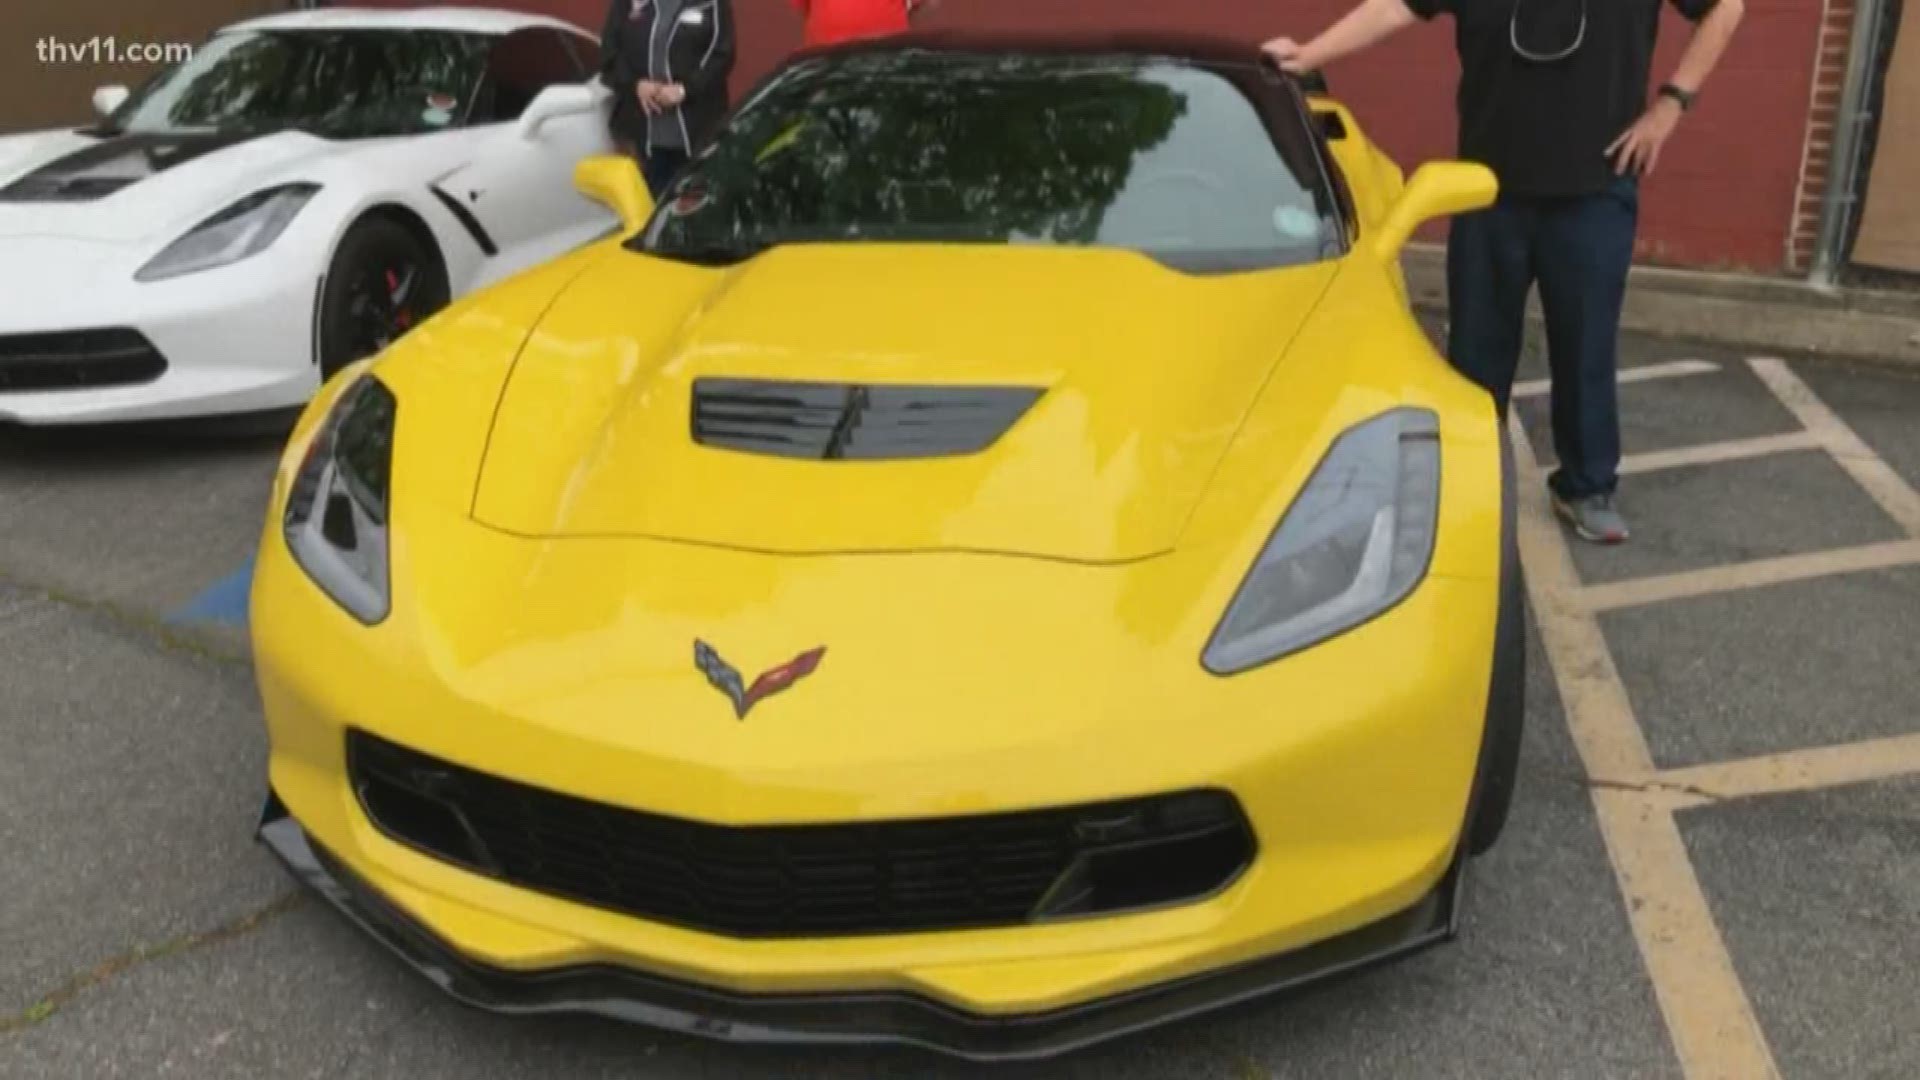 Central Arkansas Corvette Club is hosting the 21st Annual Corvette Weekend at the Hot Springs Convention Center from April 18 - 20.